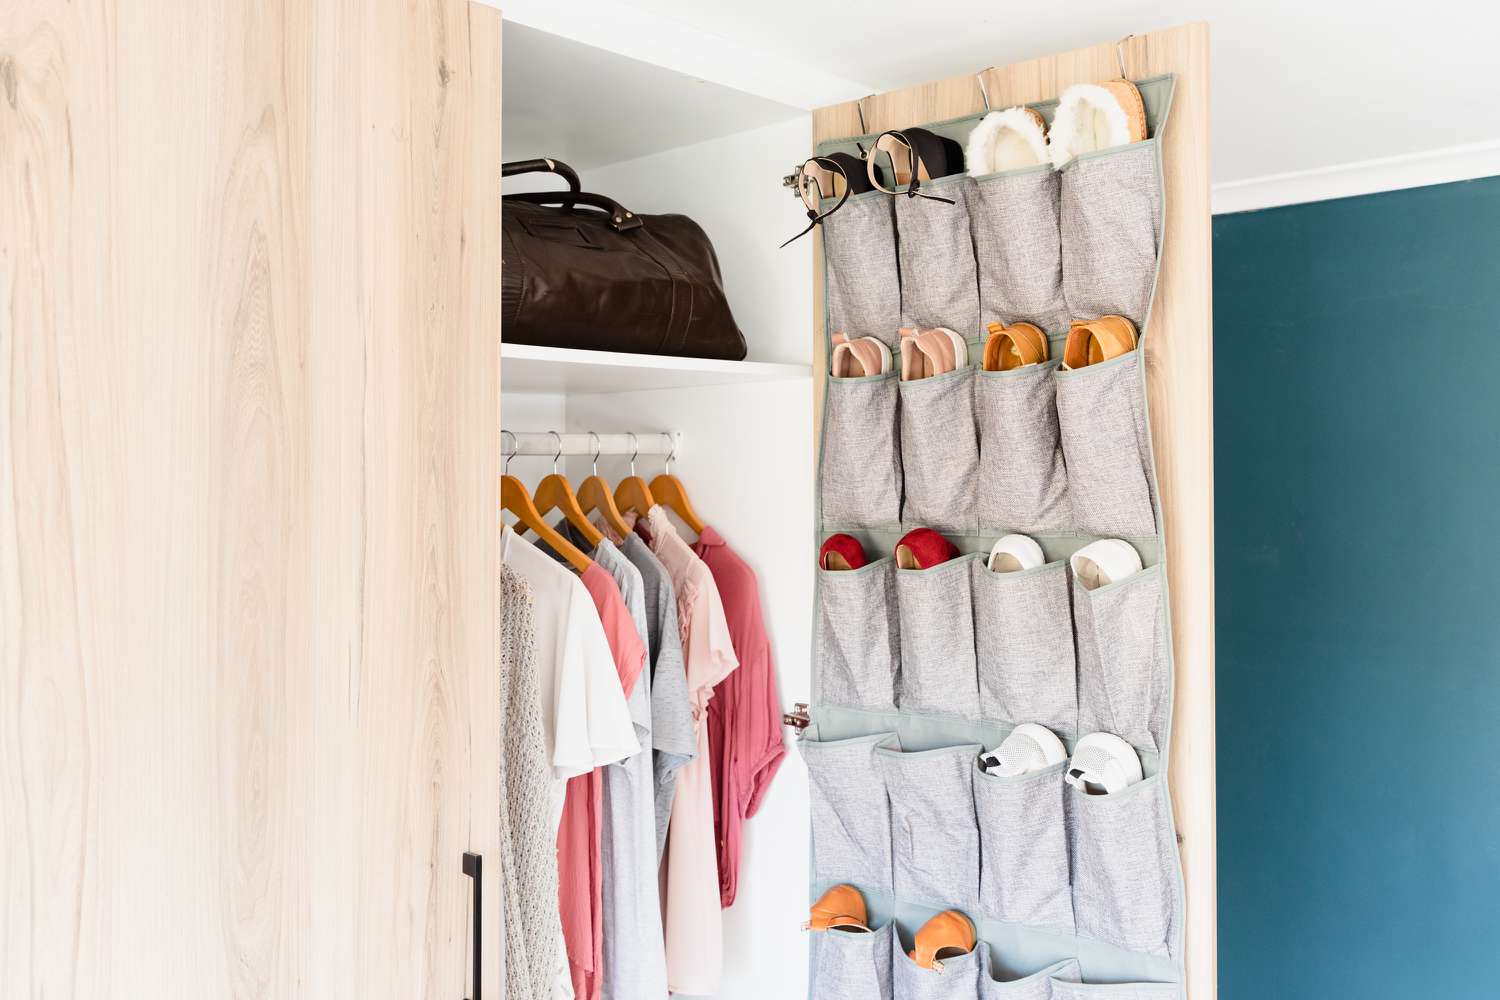 An over-the-door shoe organizer being used in a closet